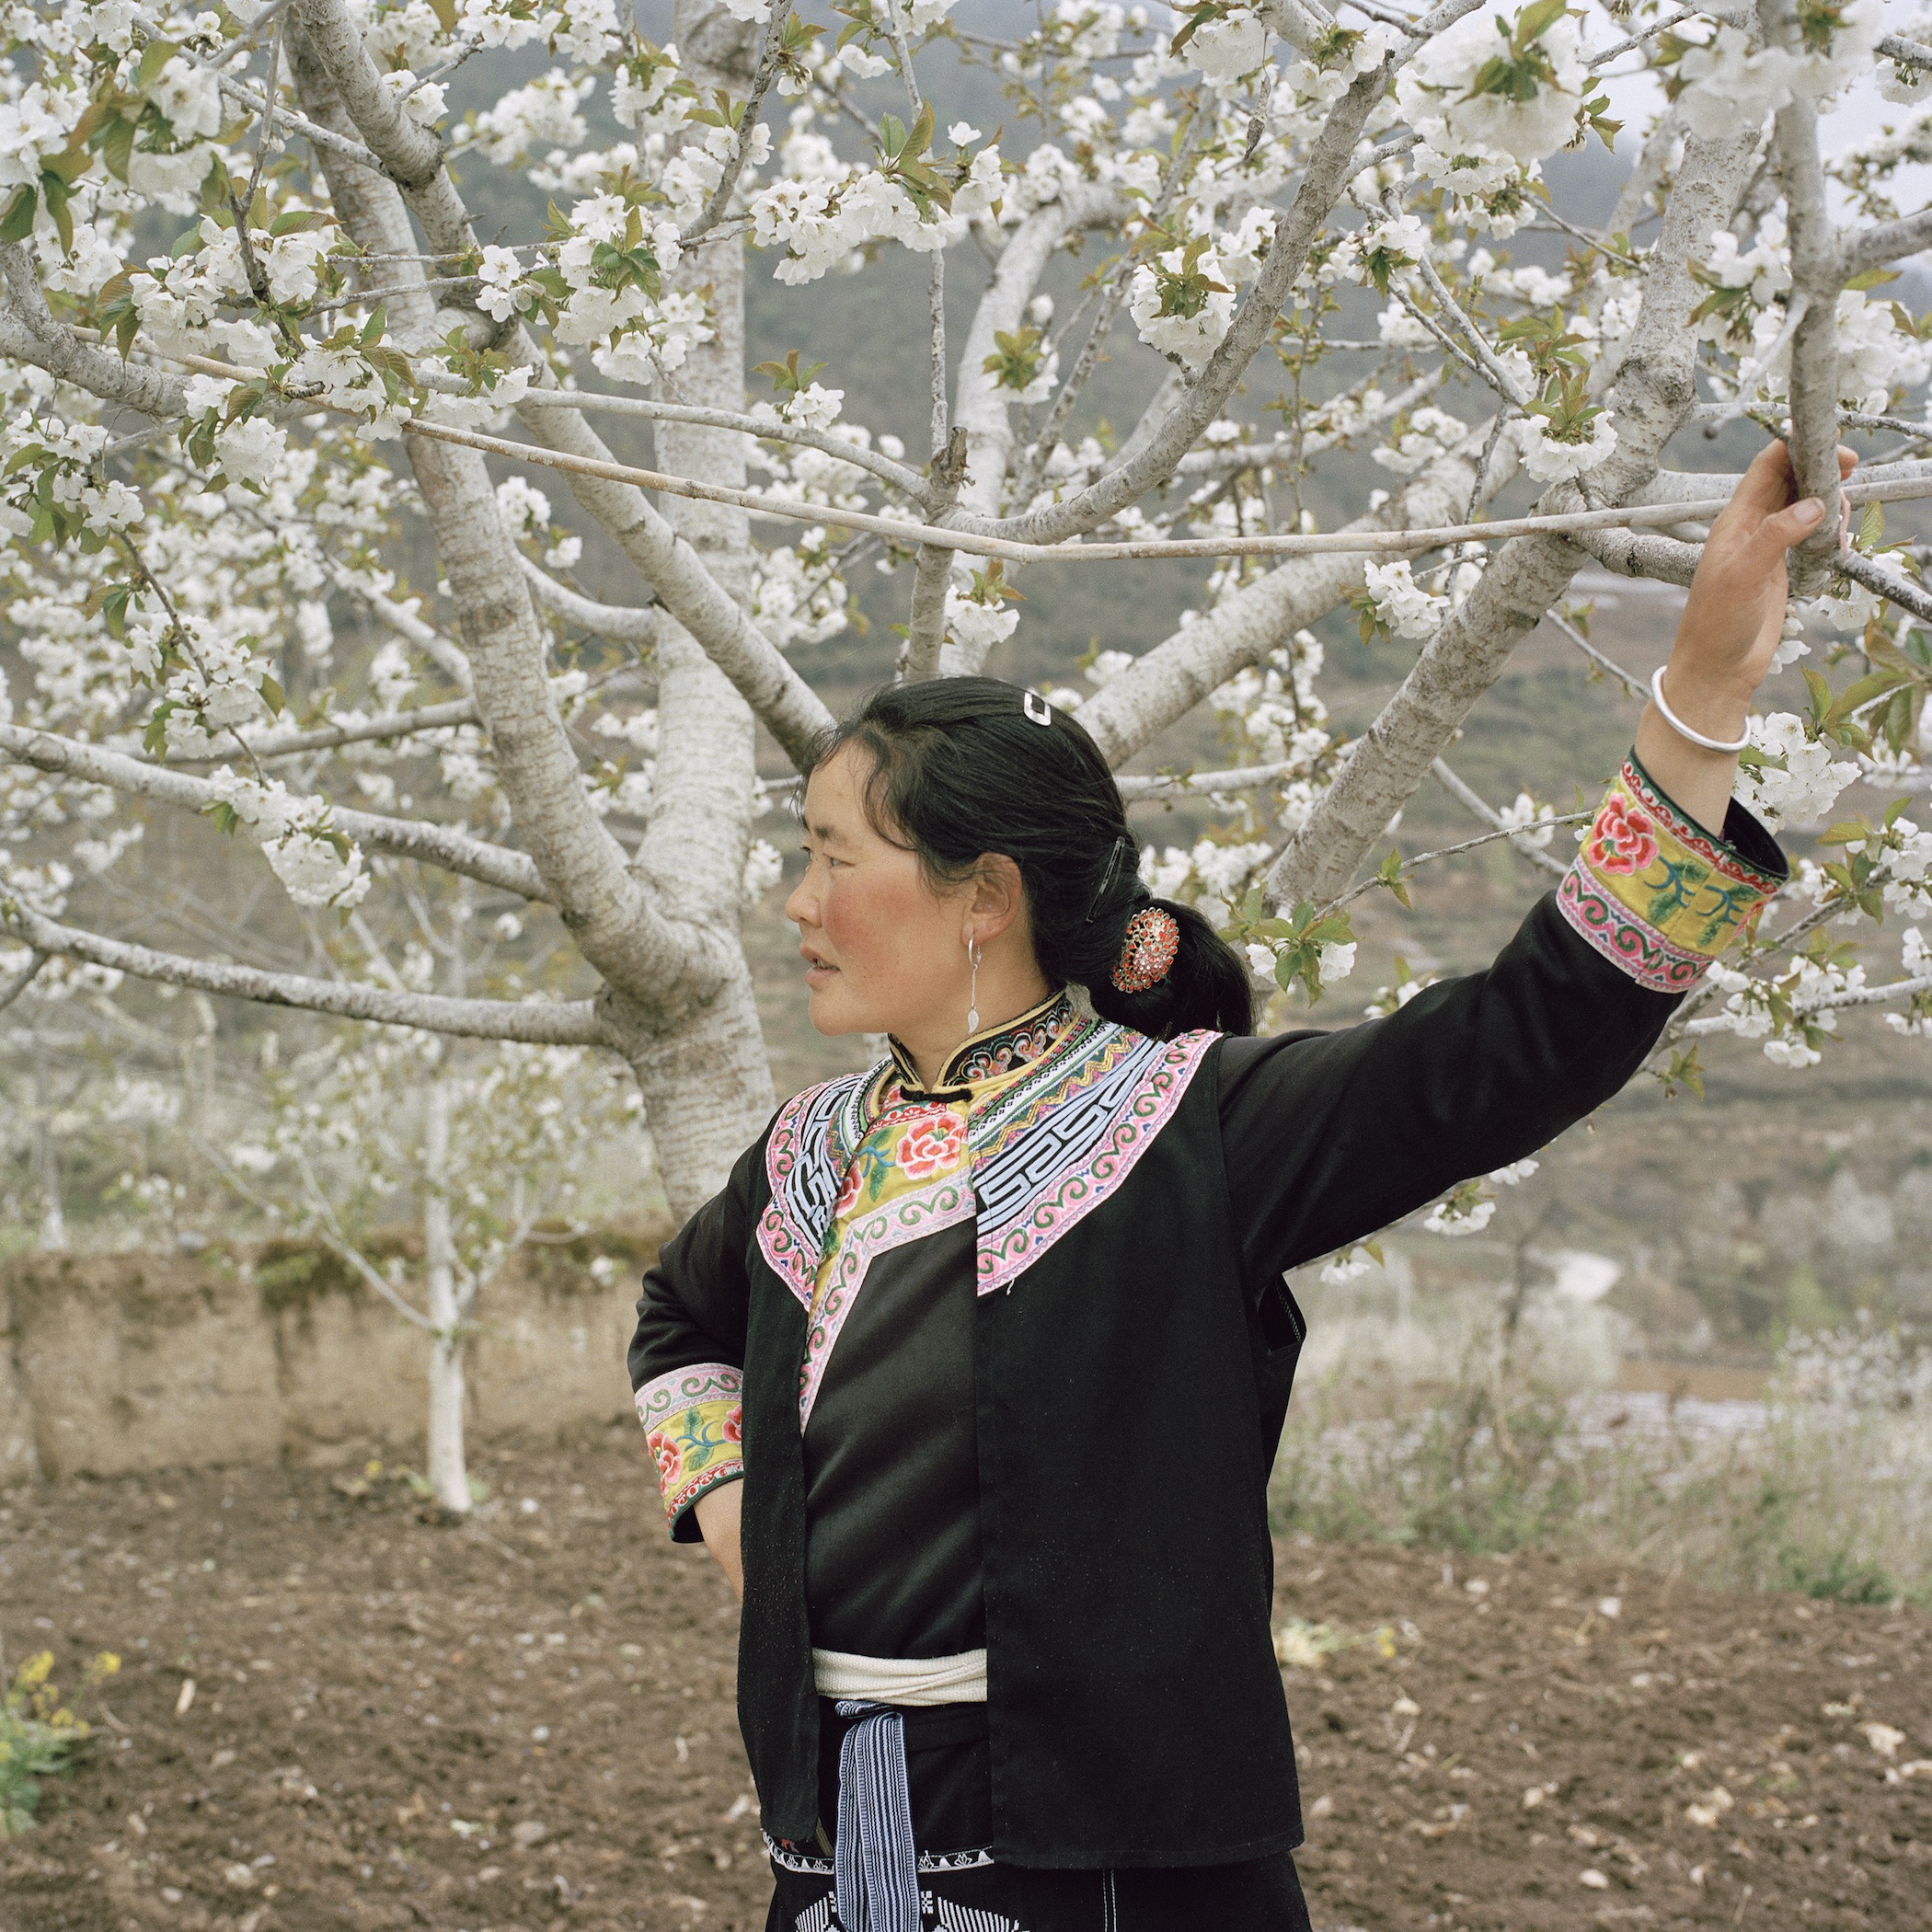 Woman and her Fully Grown Cherry Trees, Untouched by the Earthquake, Radish Village, Sichuan, China, April 2016